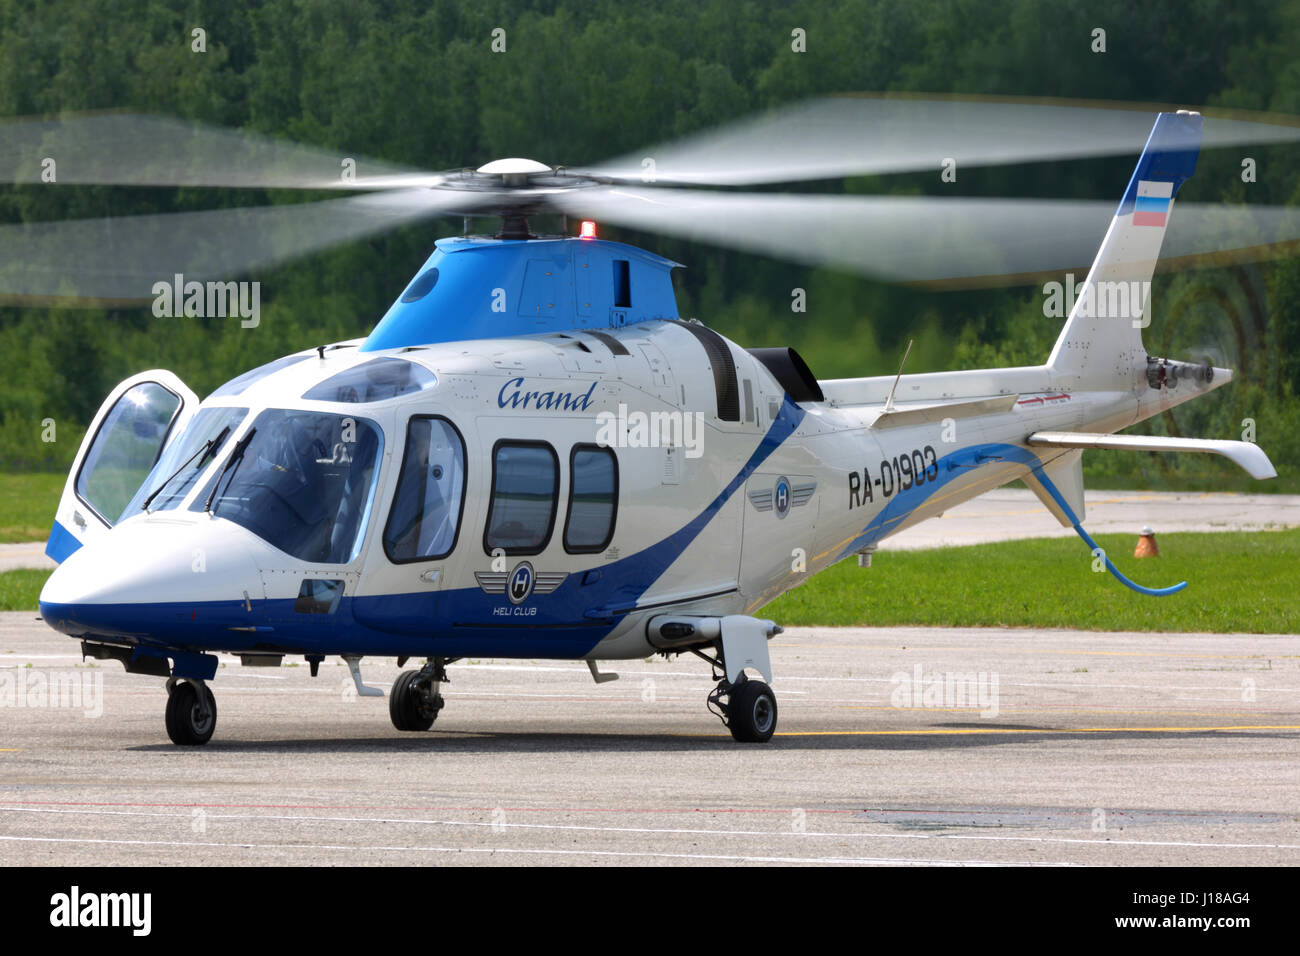 VLADIMIR, RUSSIA - JUNE 2, 2015: Private Agusta A109S Grand helicopter RA-01903 standing at Semyazino airfiled. Stock Photo